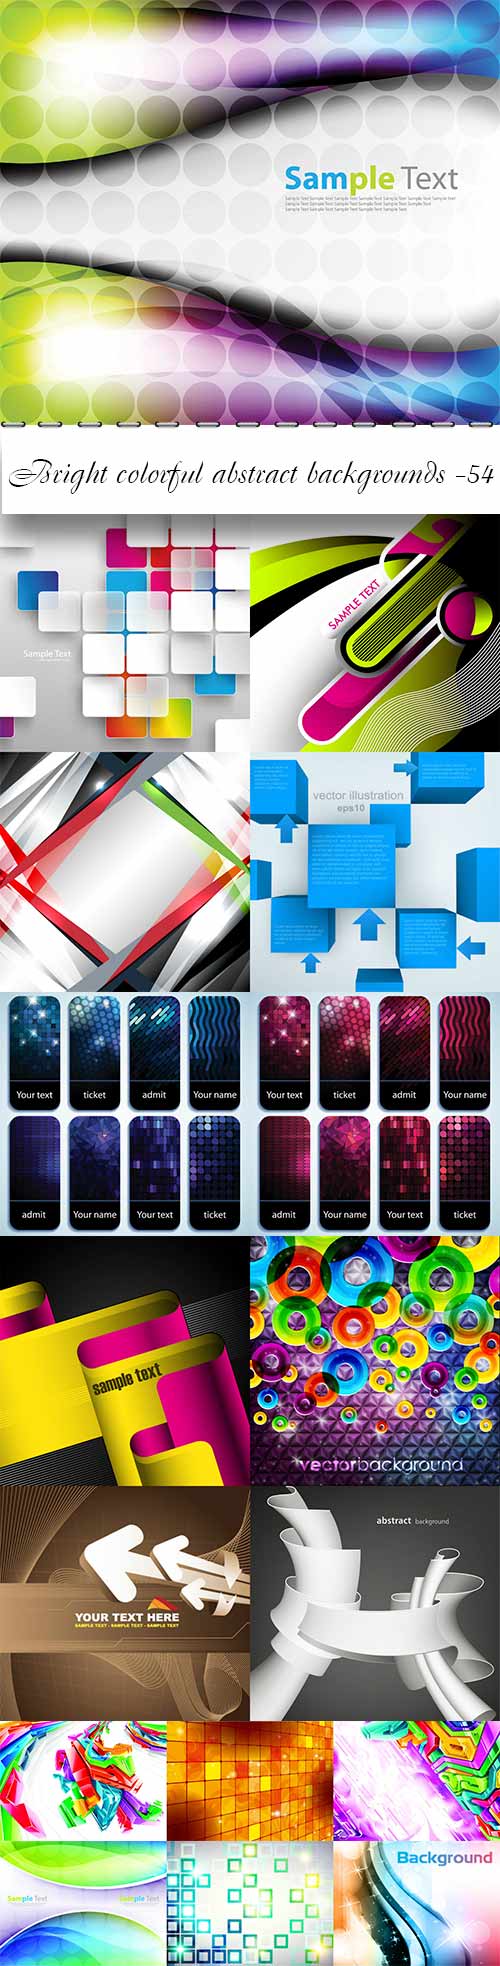 Bright colorful abstract backgrounds vector -54